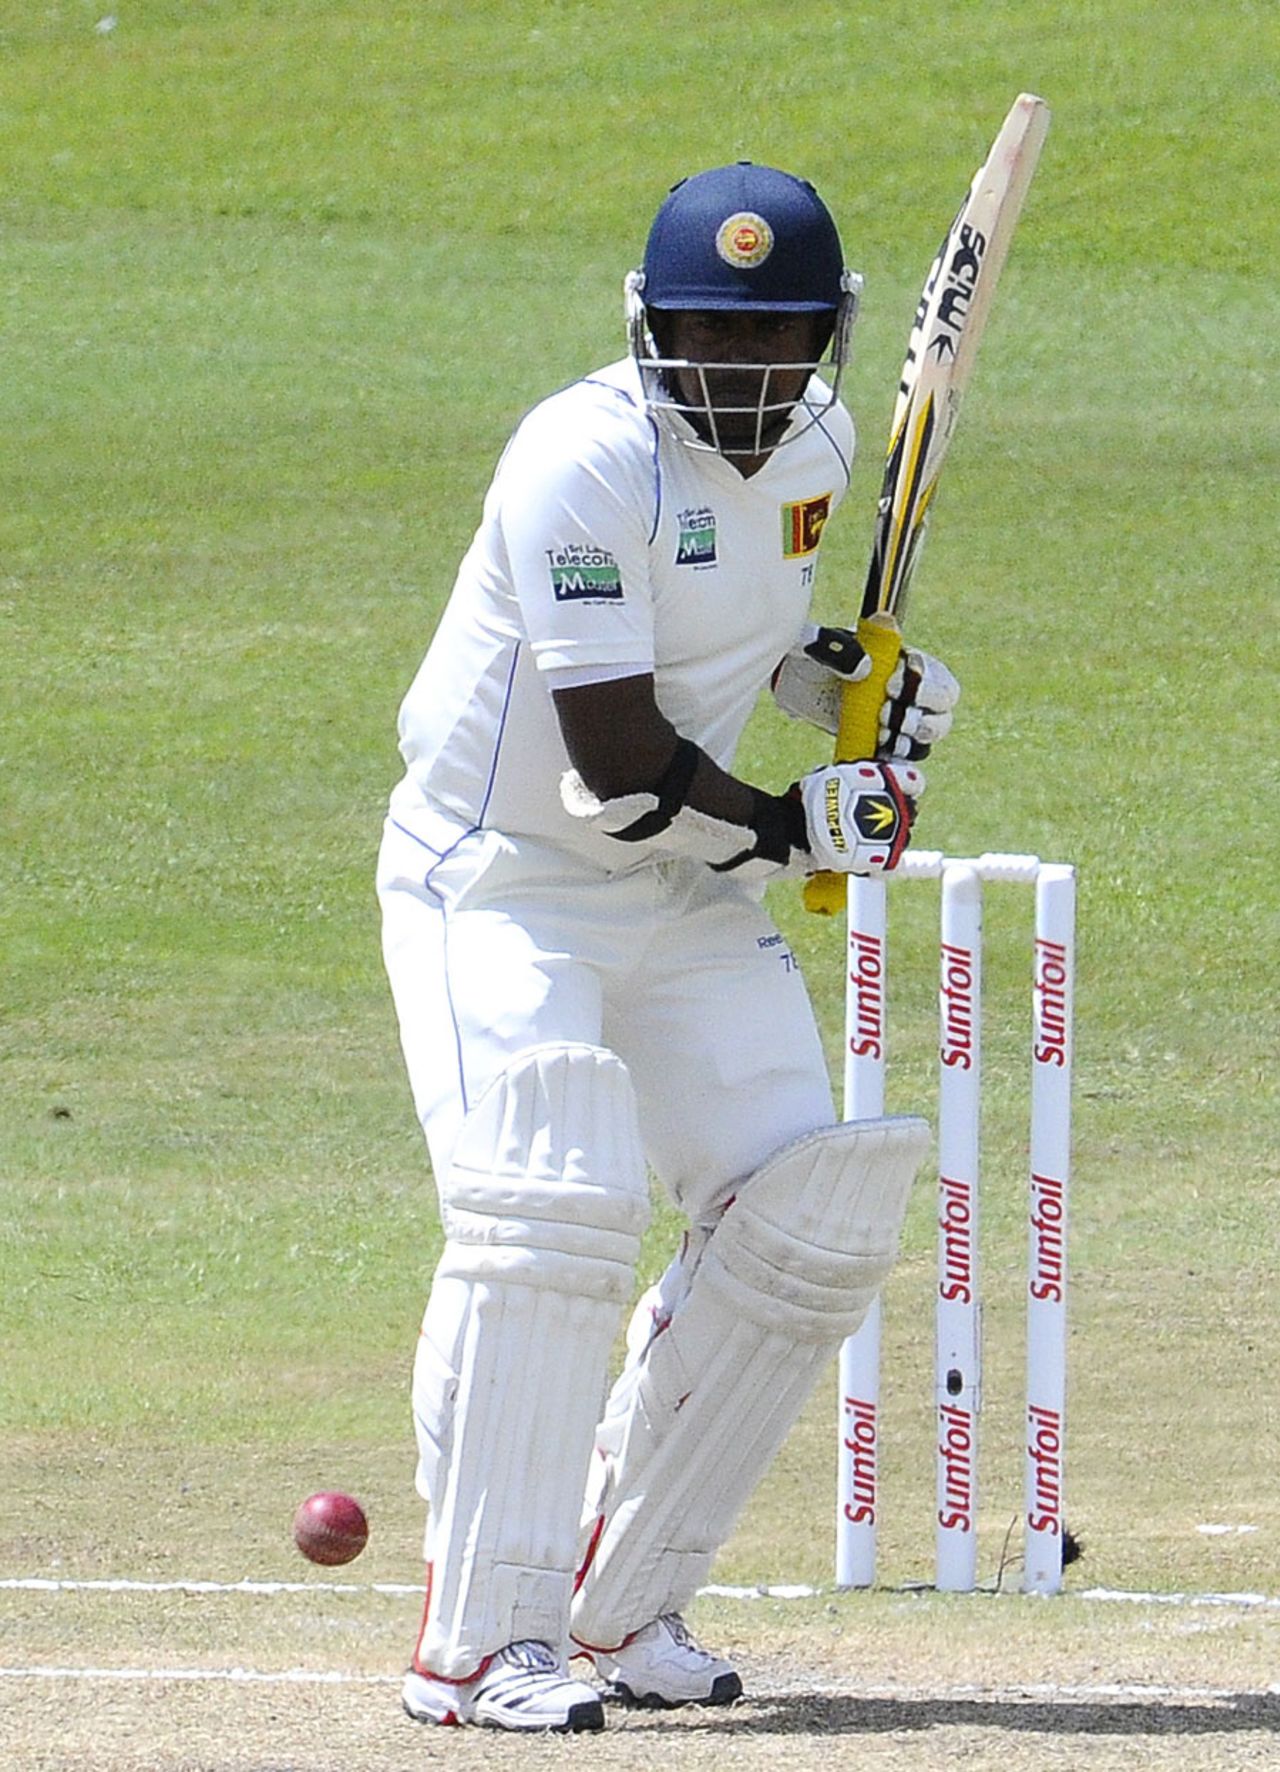 Rangana Herath gets in position to play a shot, South Africa v Sri Lanka, 2nd Test, Durban, 4th day, December 29, 2011